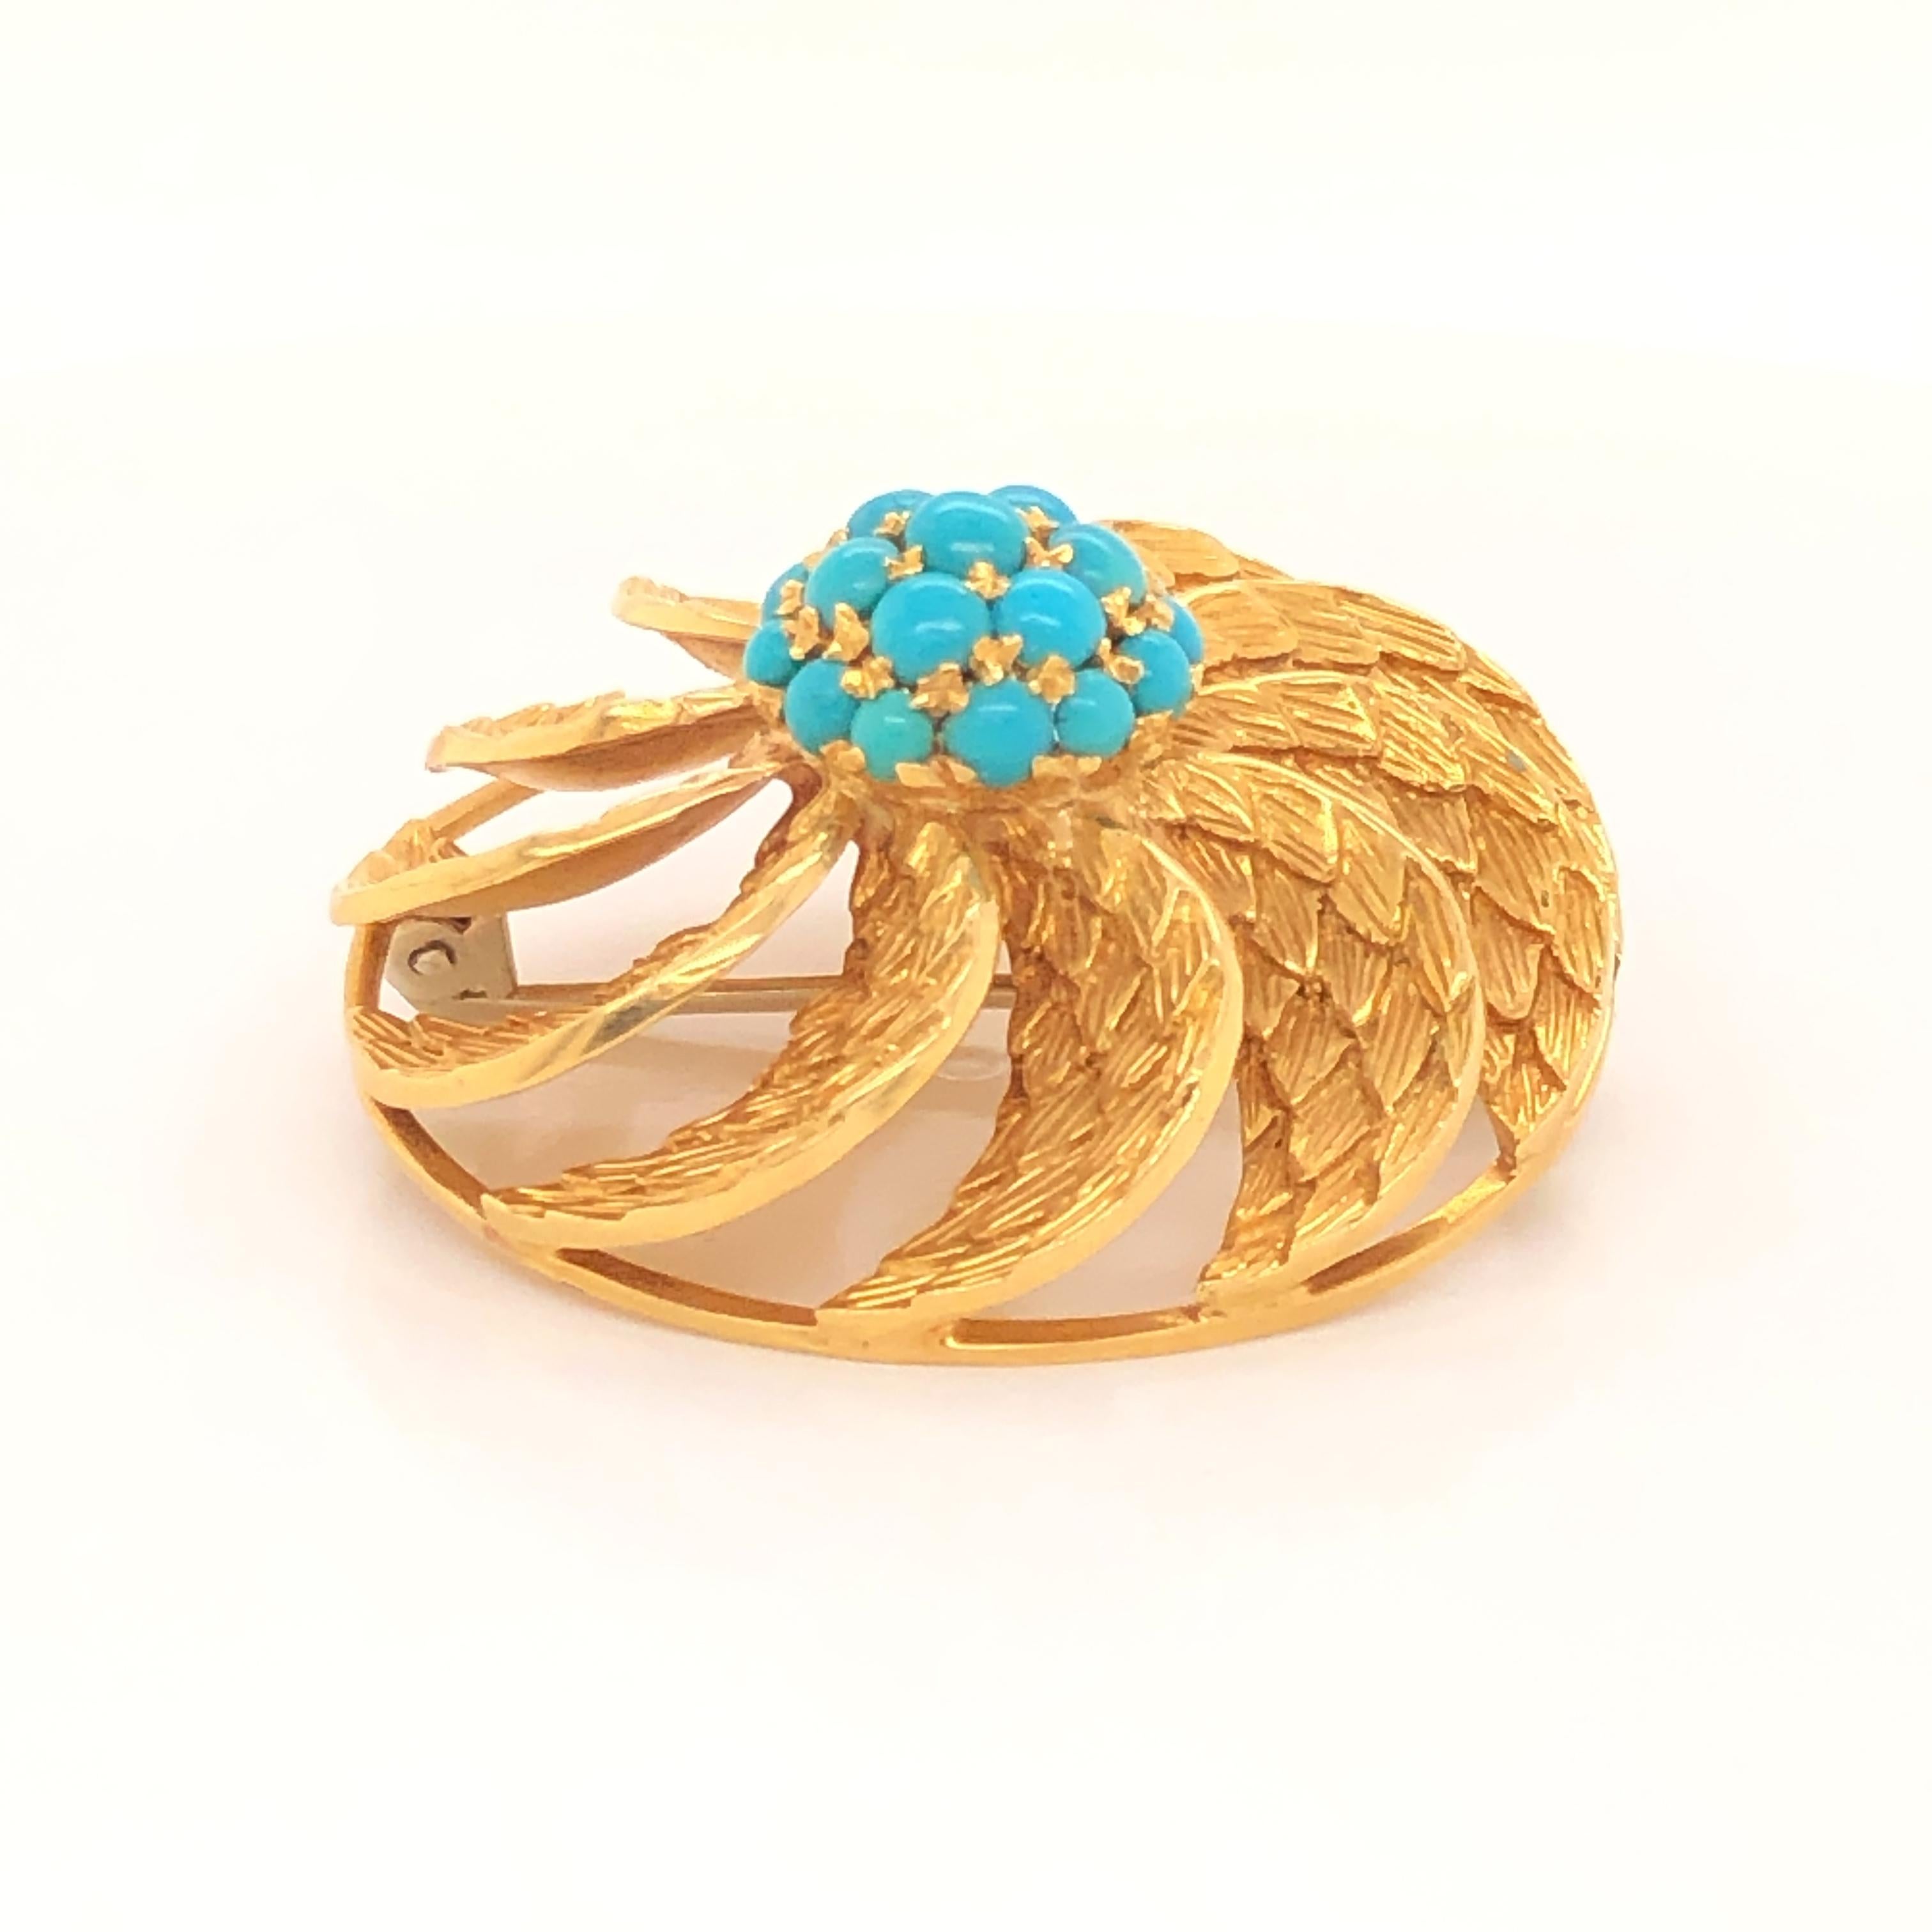 Finely made Italian three dimensional 18k yellow gold brooch pendant featuring a prong set turquoise center section amongst swirling leaves.  The back has a loop that flips up and allows for the brooch to be used as a pendant.  The loops turns so it